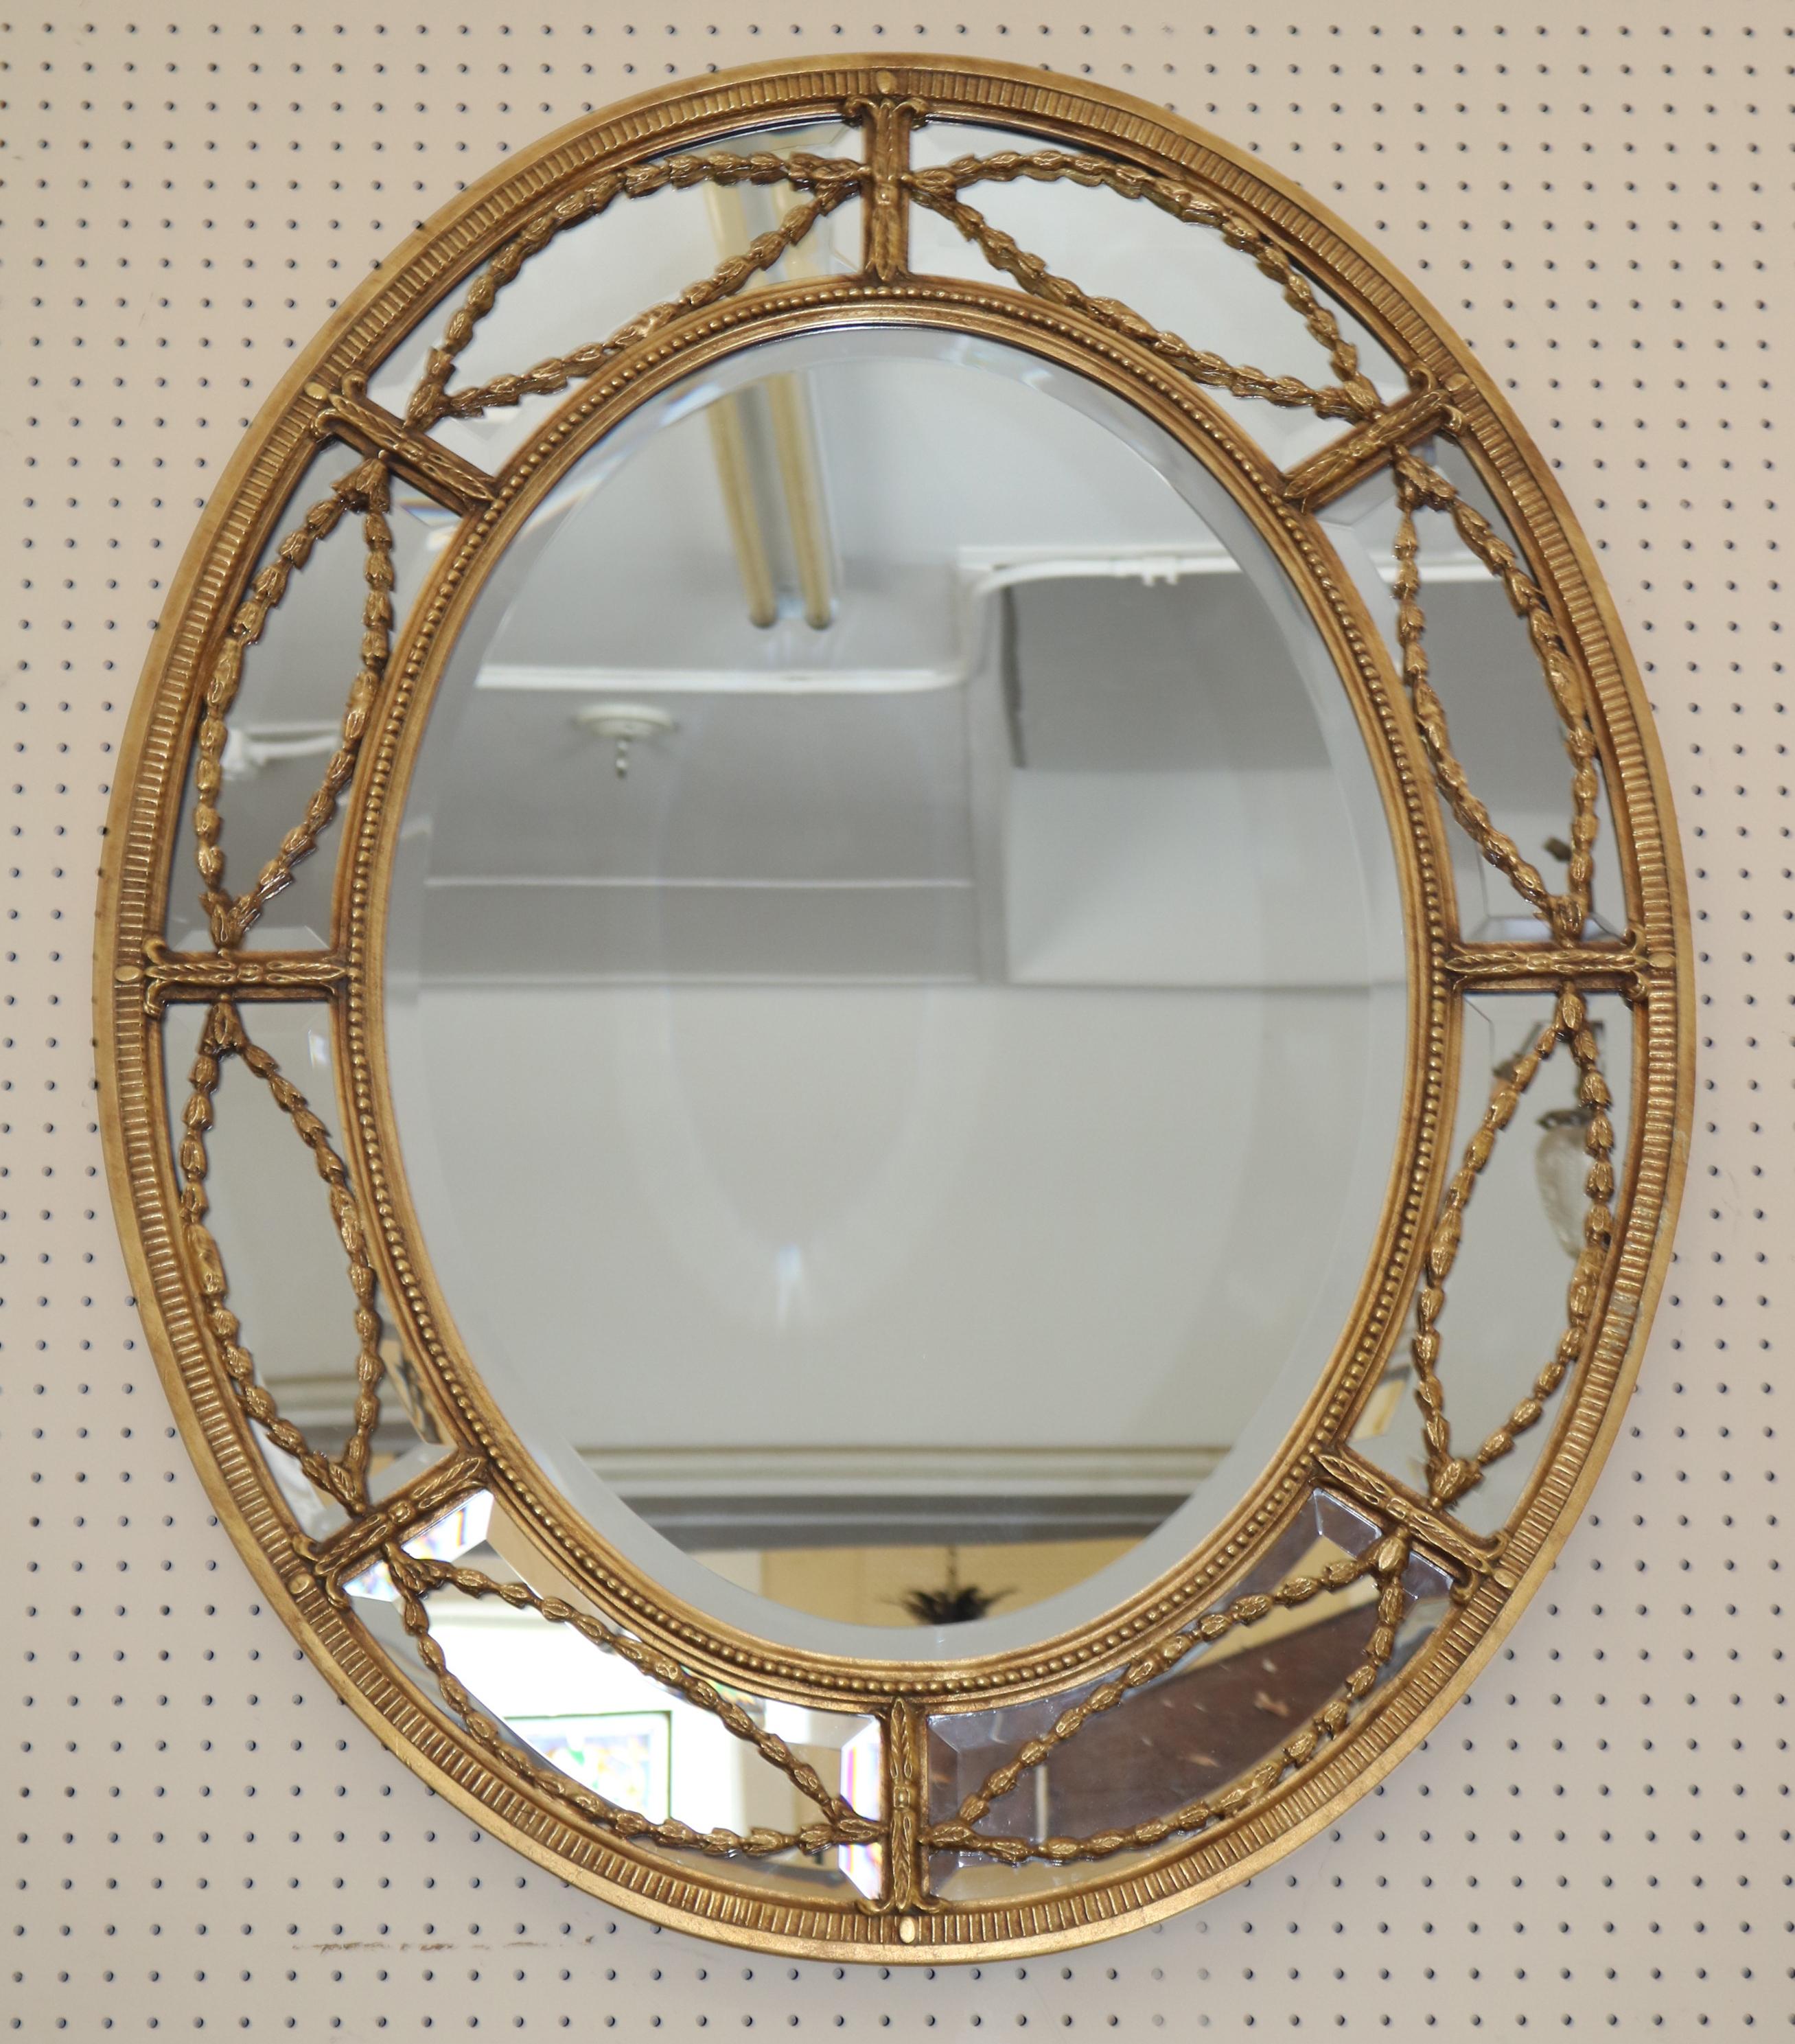 Friedman Brothers Beveled Mirror Model Adamesque Horizontal or Vertical For Sale 6